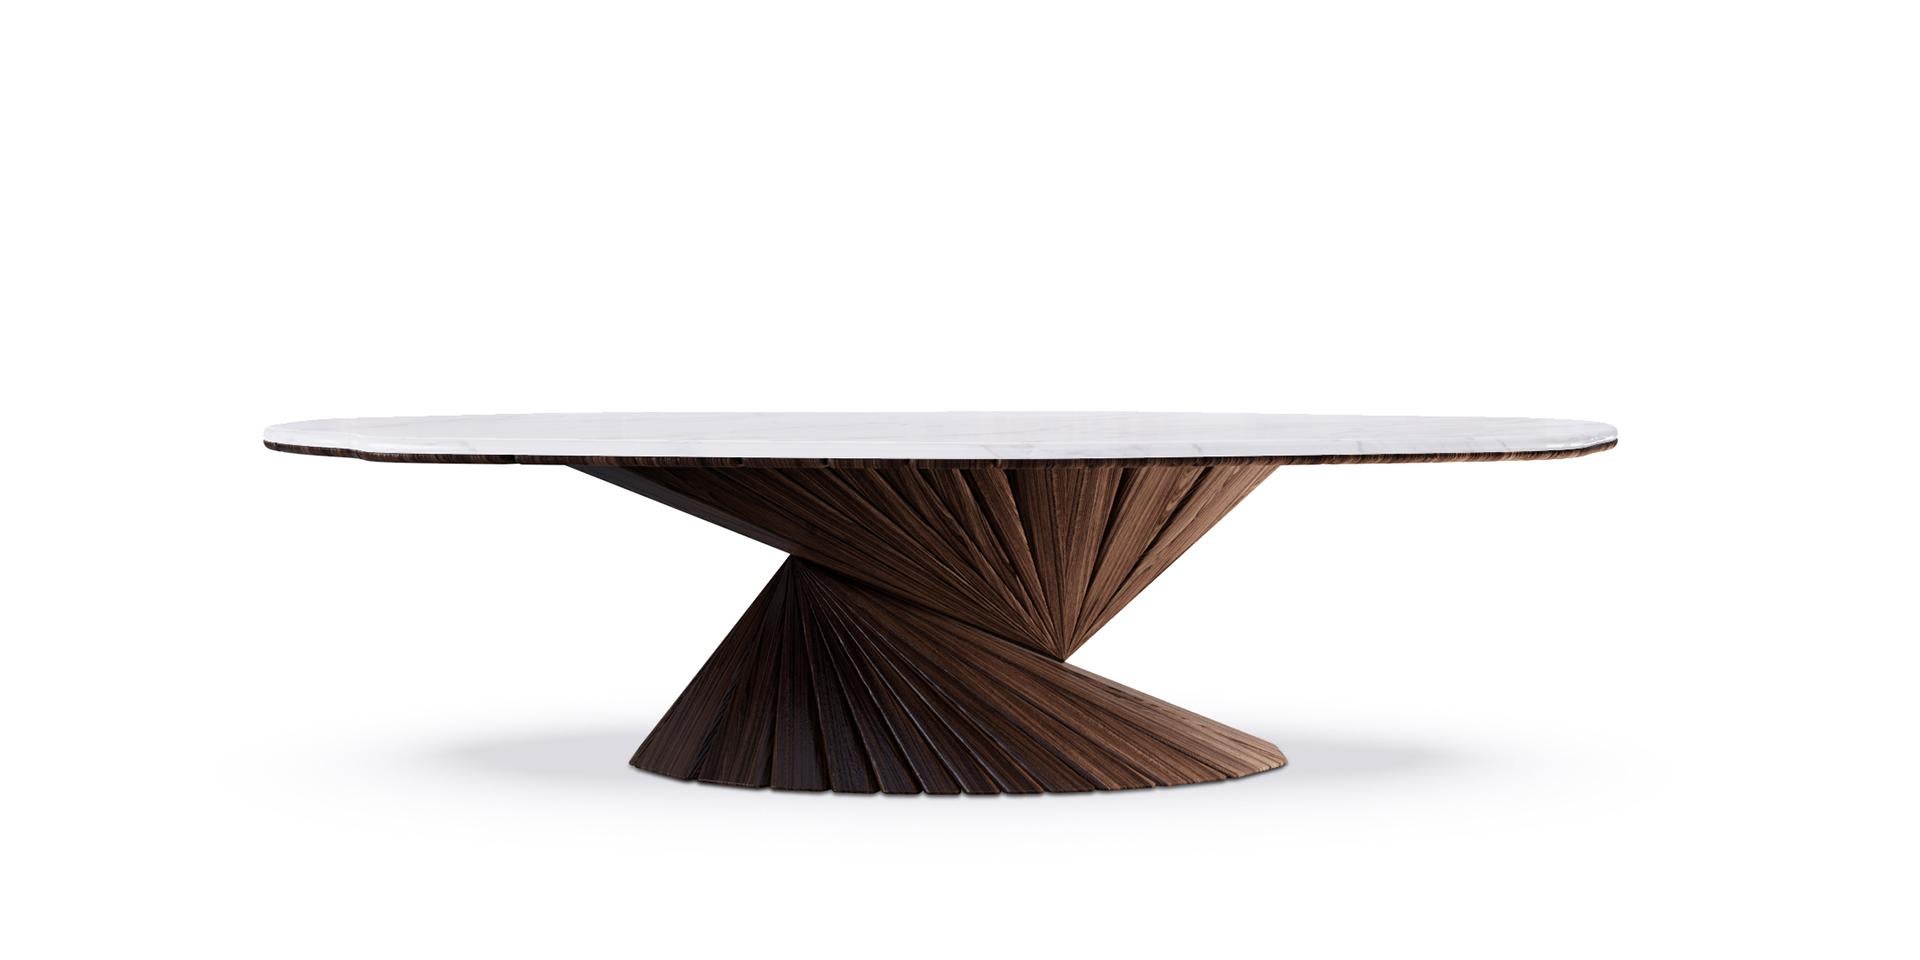 The Bonsai table combines ALMA DE LUCE know how with natural wealth material like walnut wood or Estremoz marble. The walnut wood footer give an unusual and chic effect to this piece that supports a marble and wood top. This luxury statement table